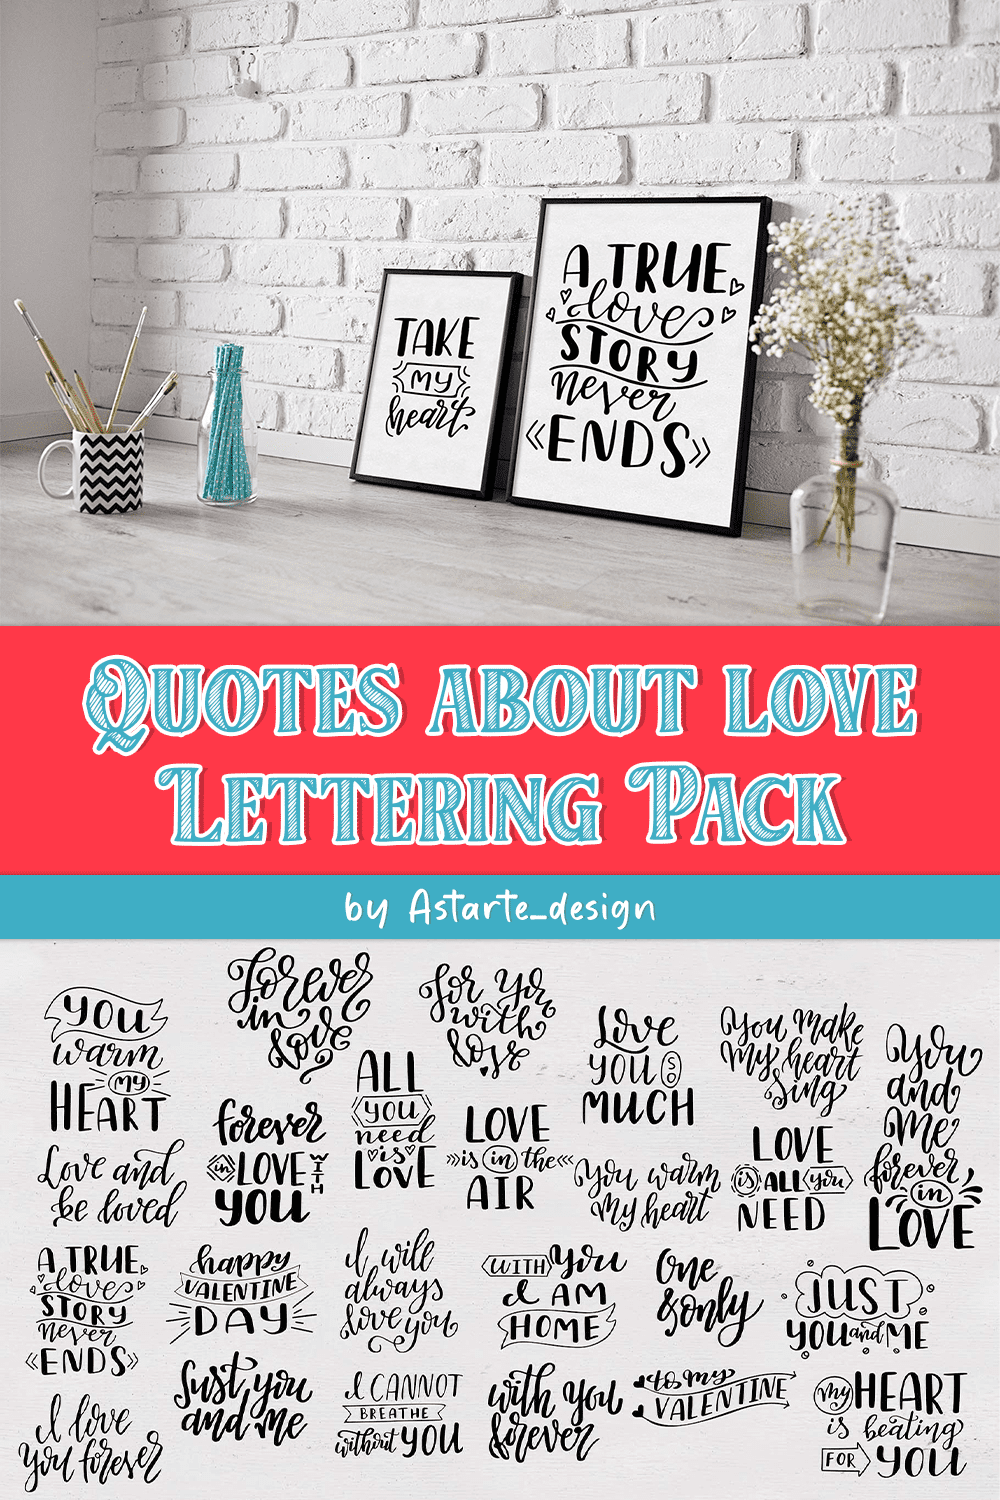 quotes about love lettering pack pinterest 62